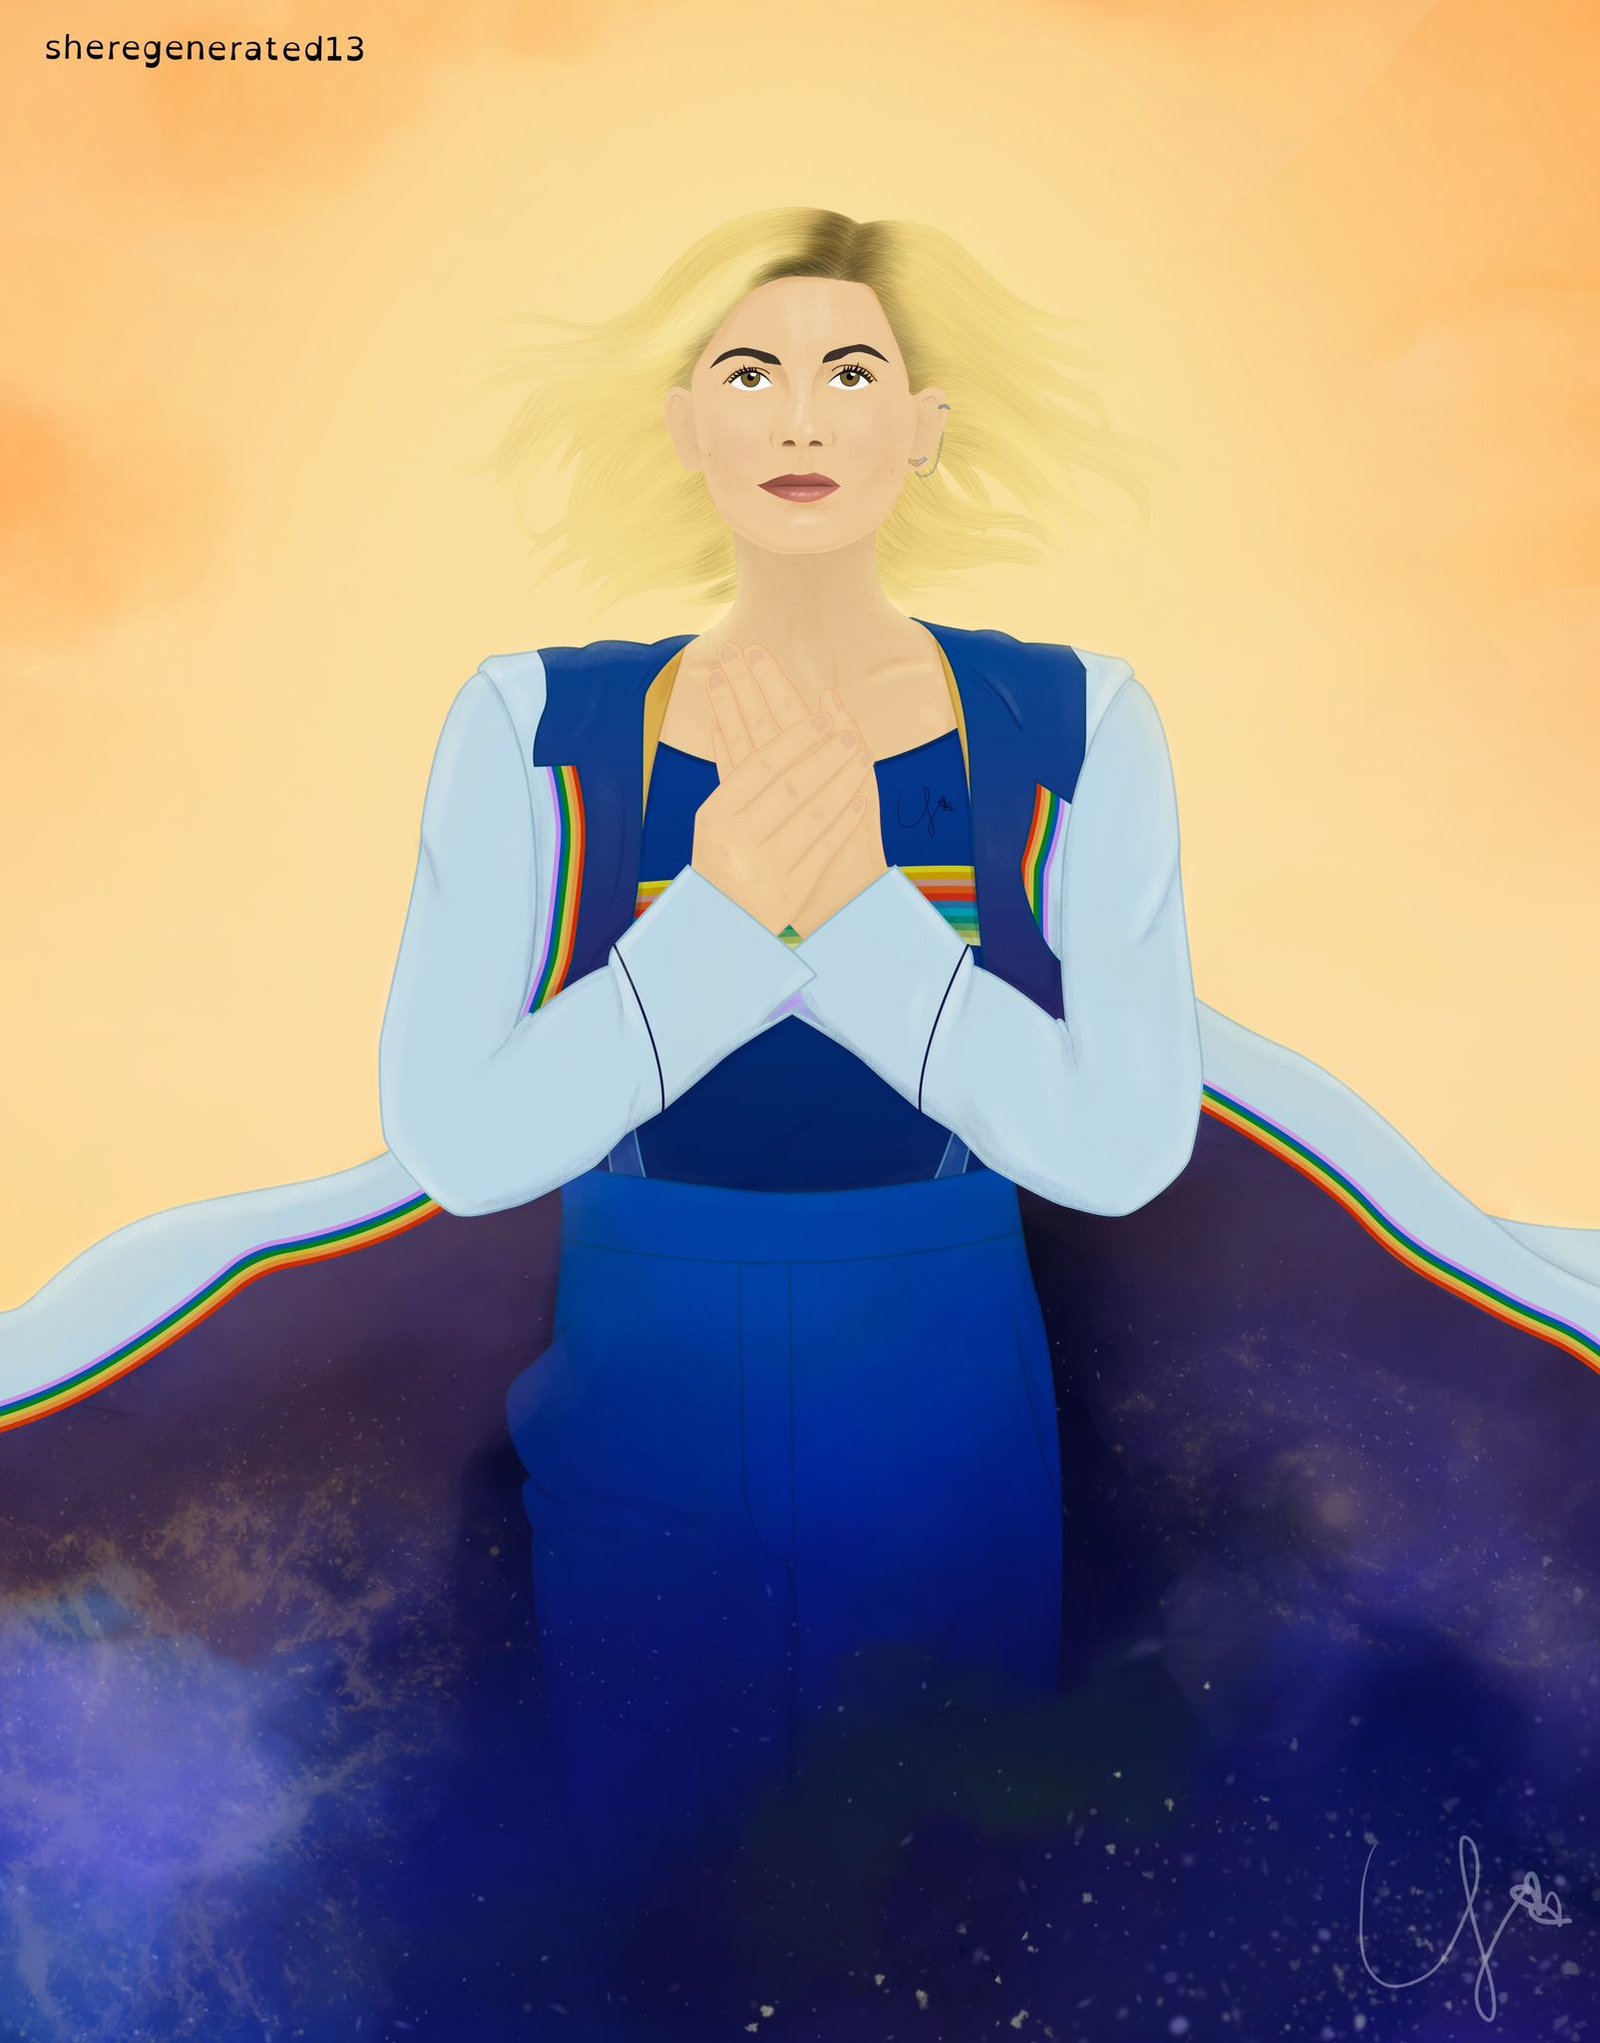 An illustration of the 13th Doctor cupping her hands. Her coat billows out behind her and she is surrounded by a warm yellow glow